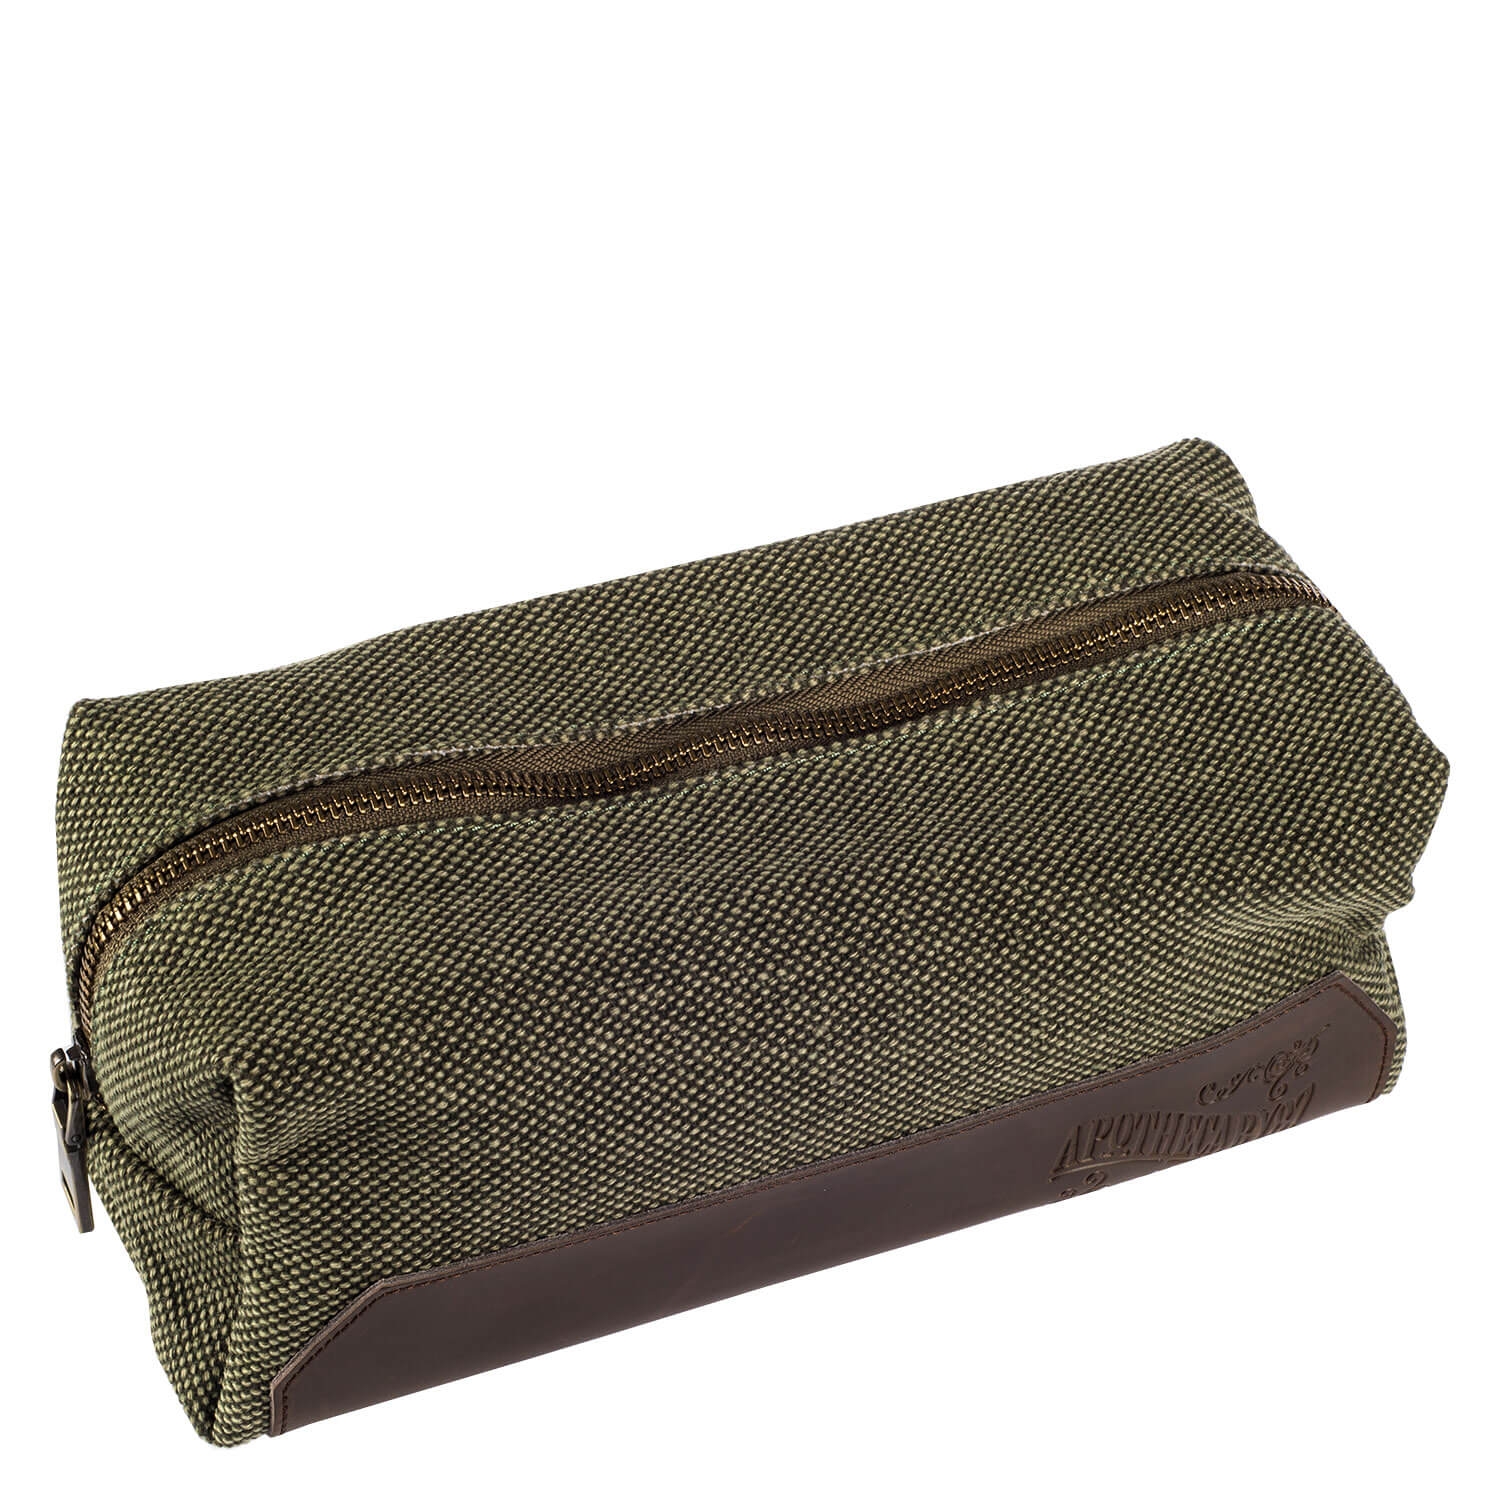 Produktbild von Apothecary87 Grooming - Dopp Bag Canvas/Real Leather